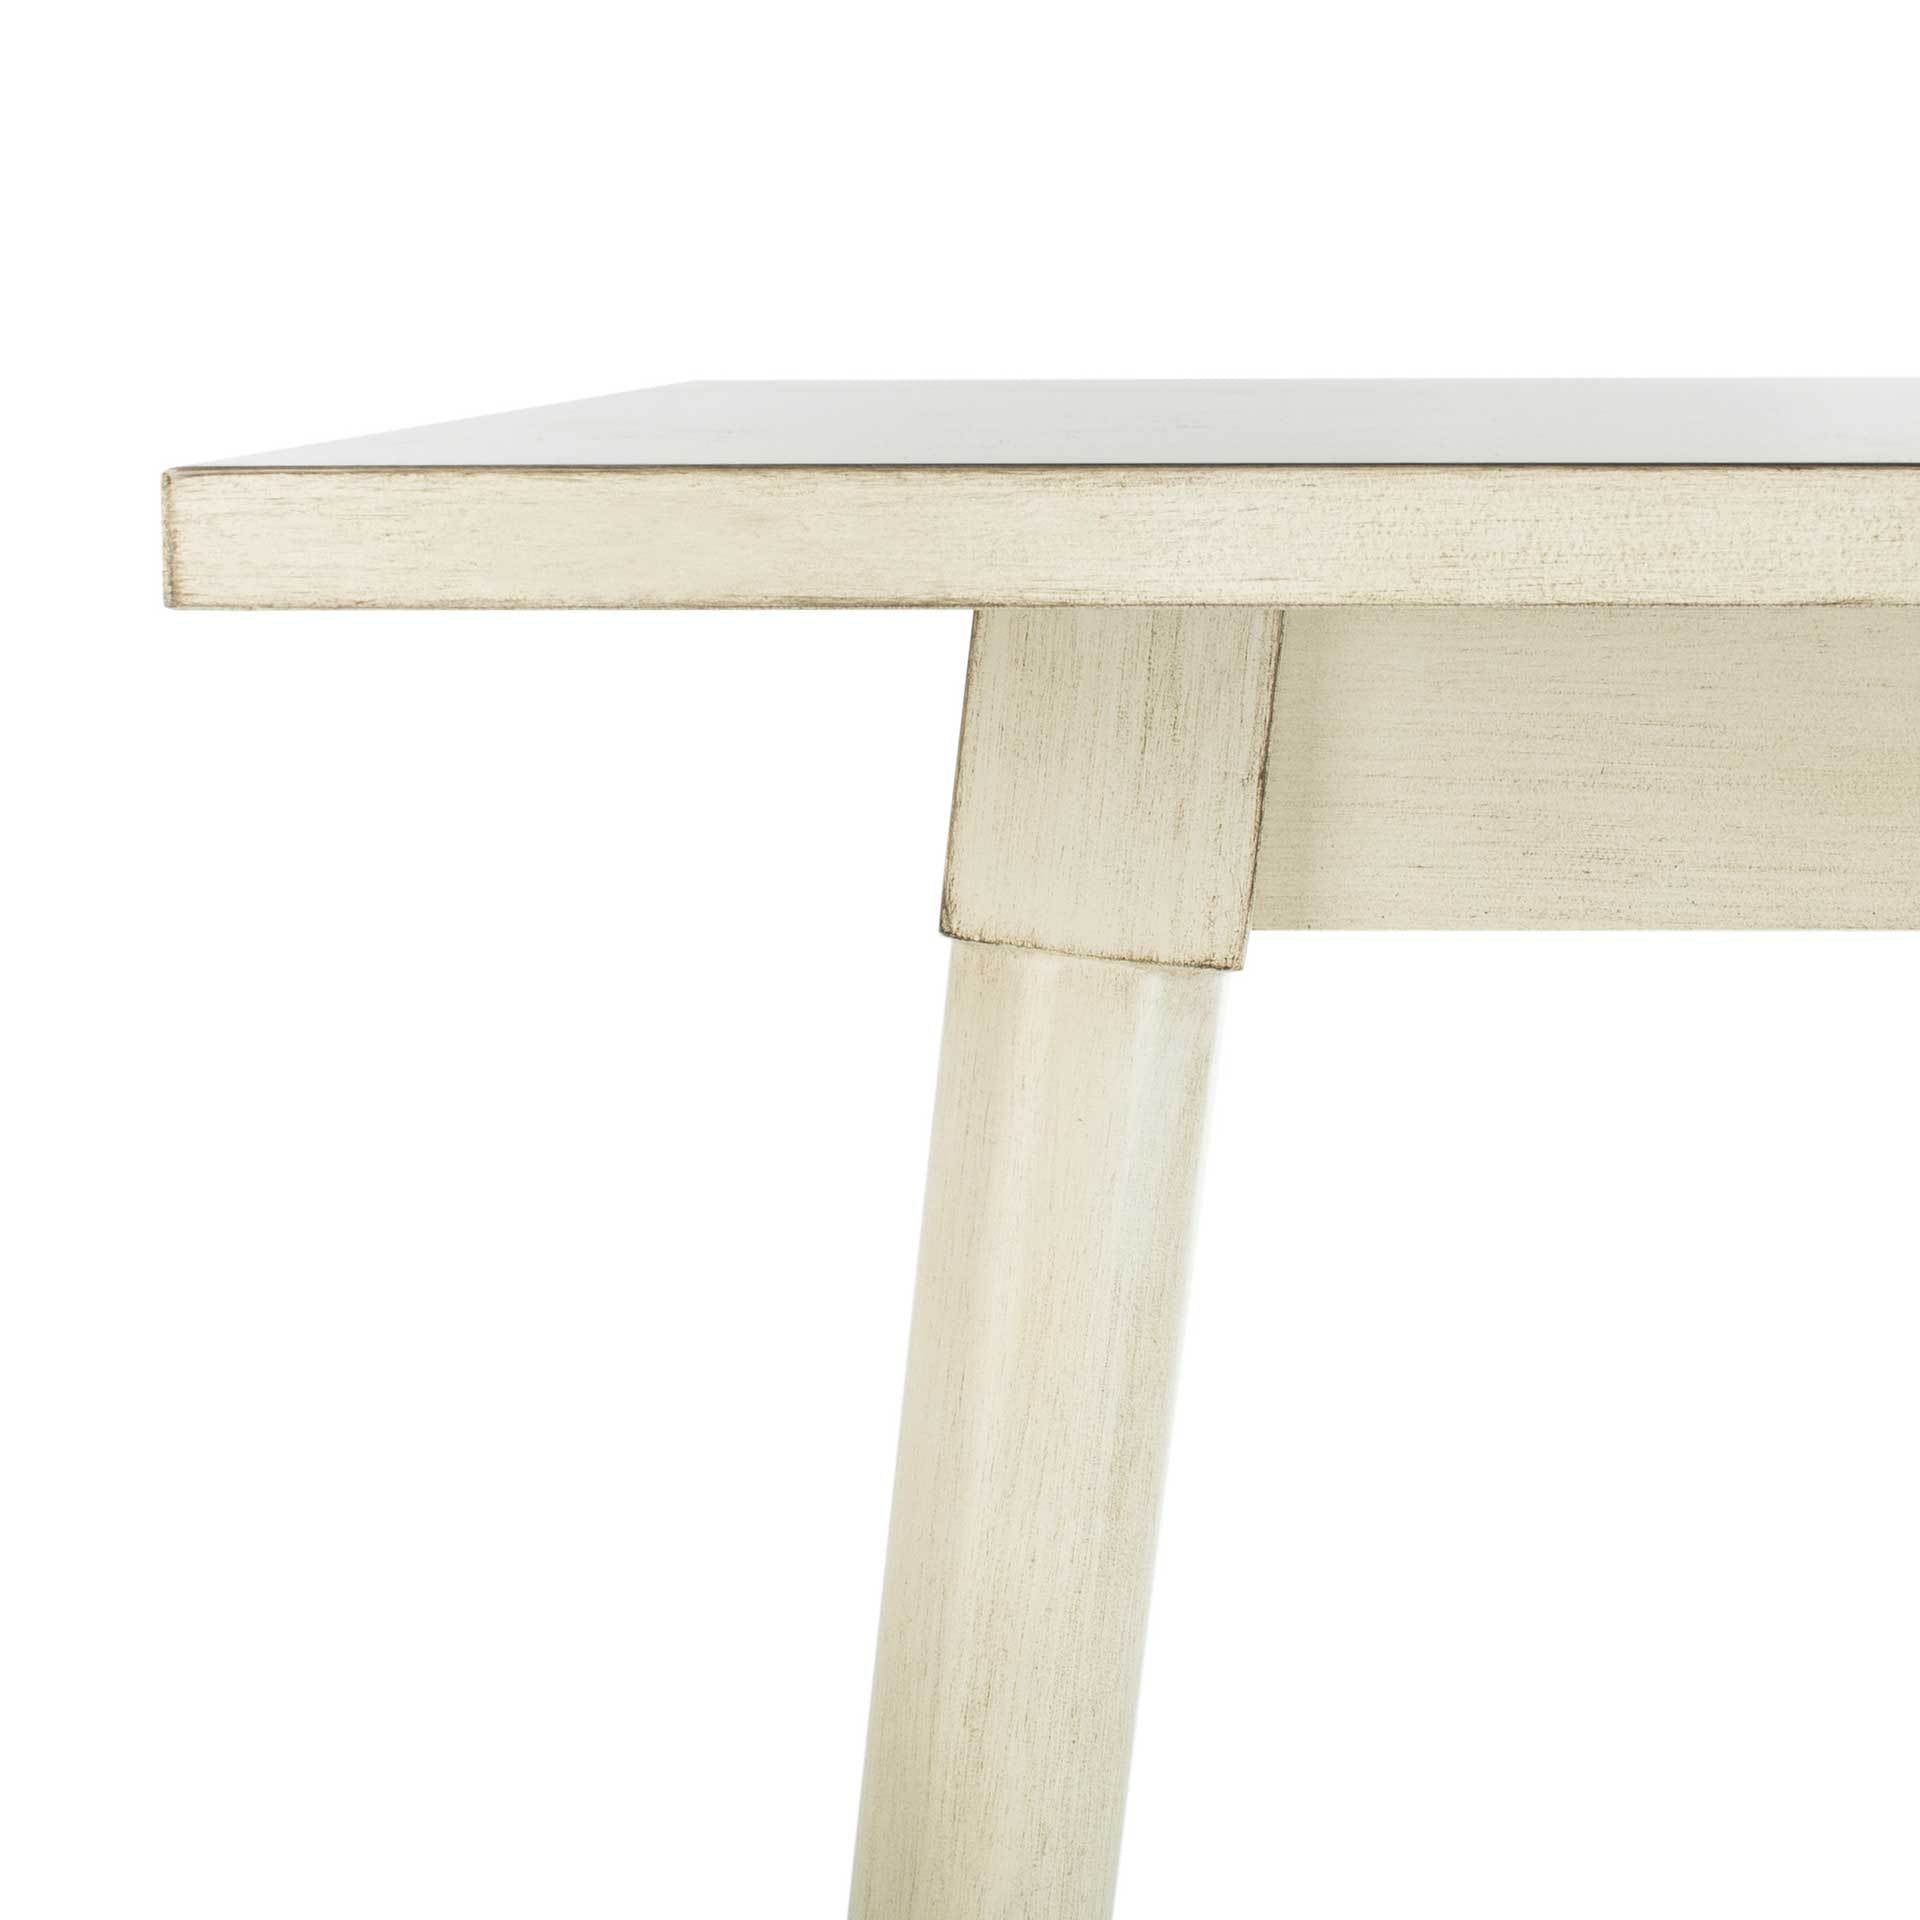 Sibel Square Dining Table White